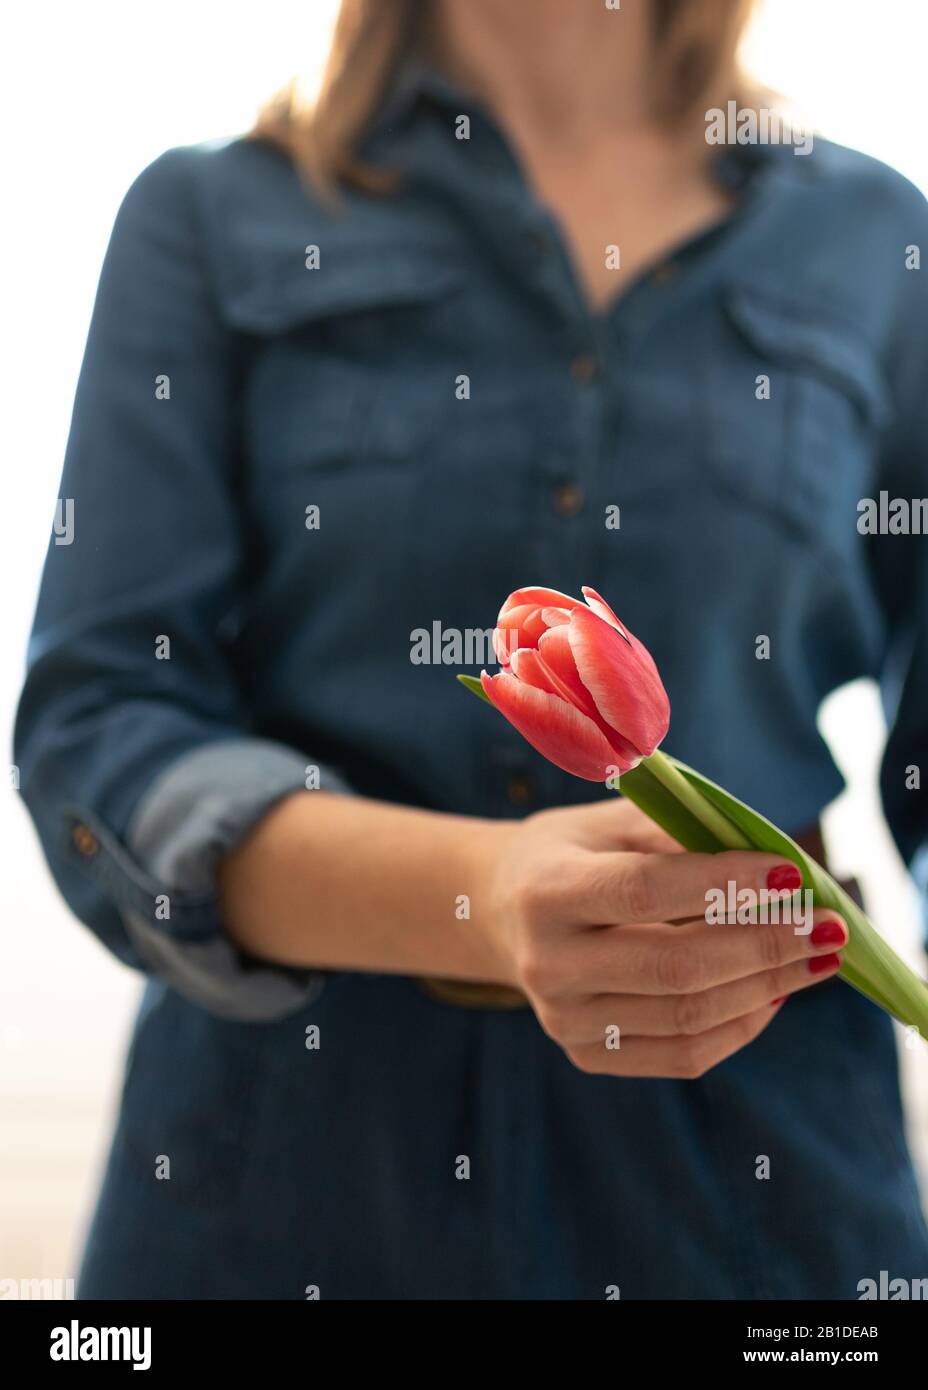 Closeup view of a red, inclined, tulip being held by a middle-aged woman wearing a denim dress. Stock Photo